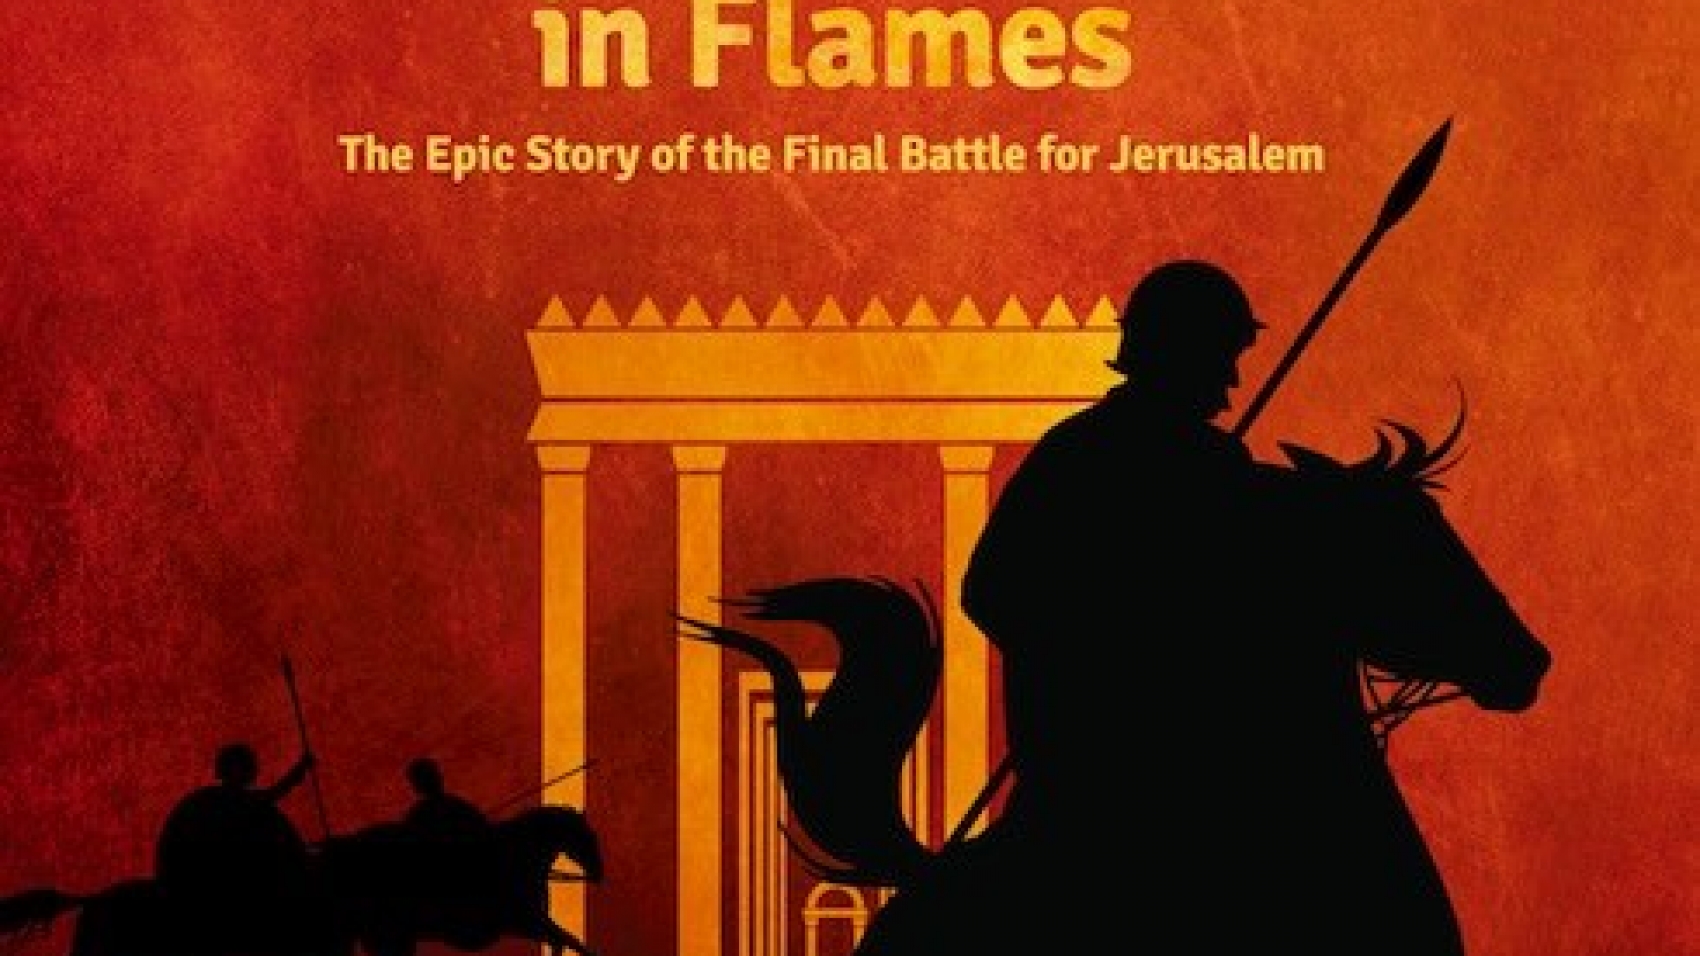 A Temple in Flames Book Review